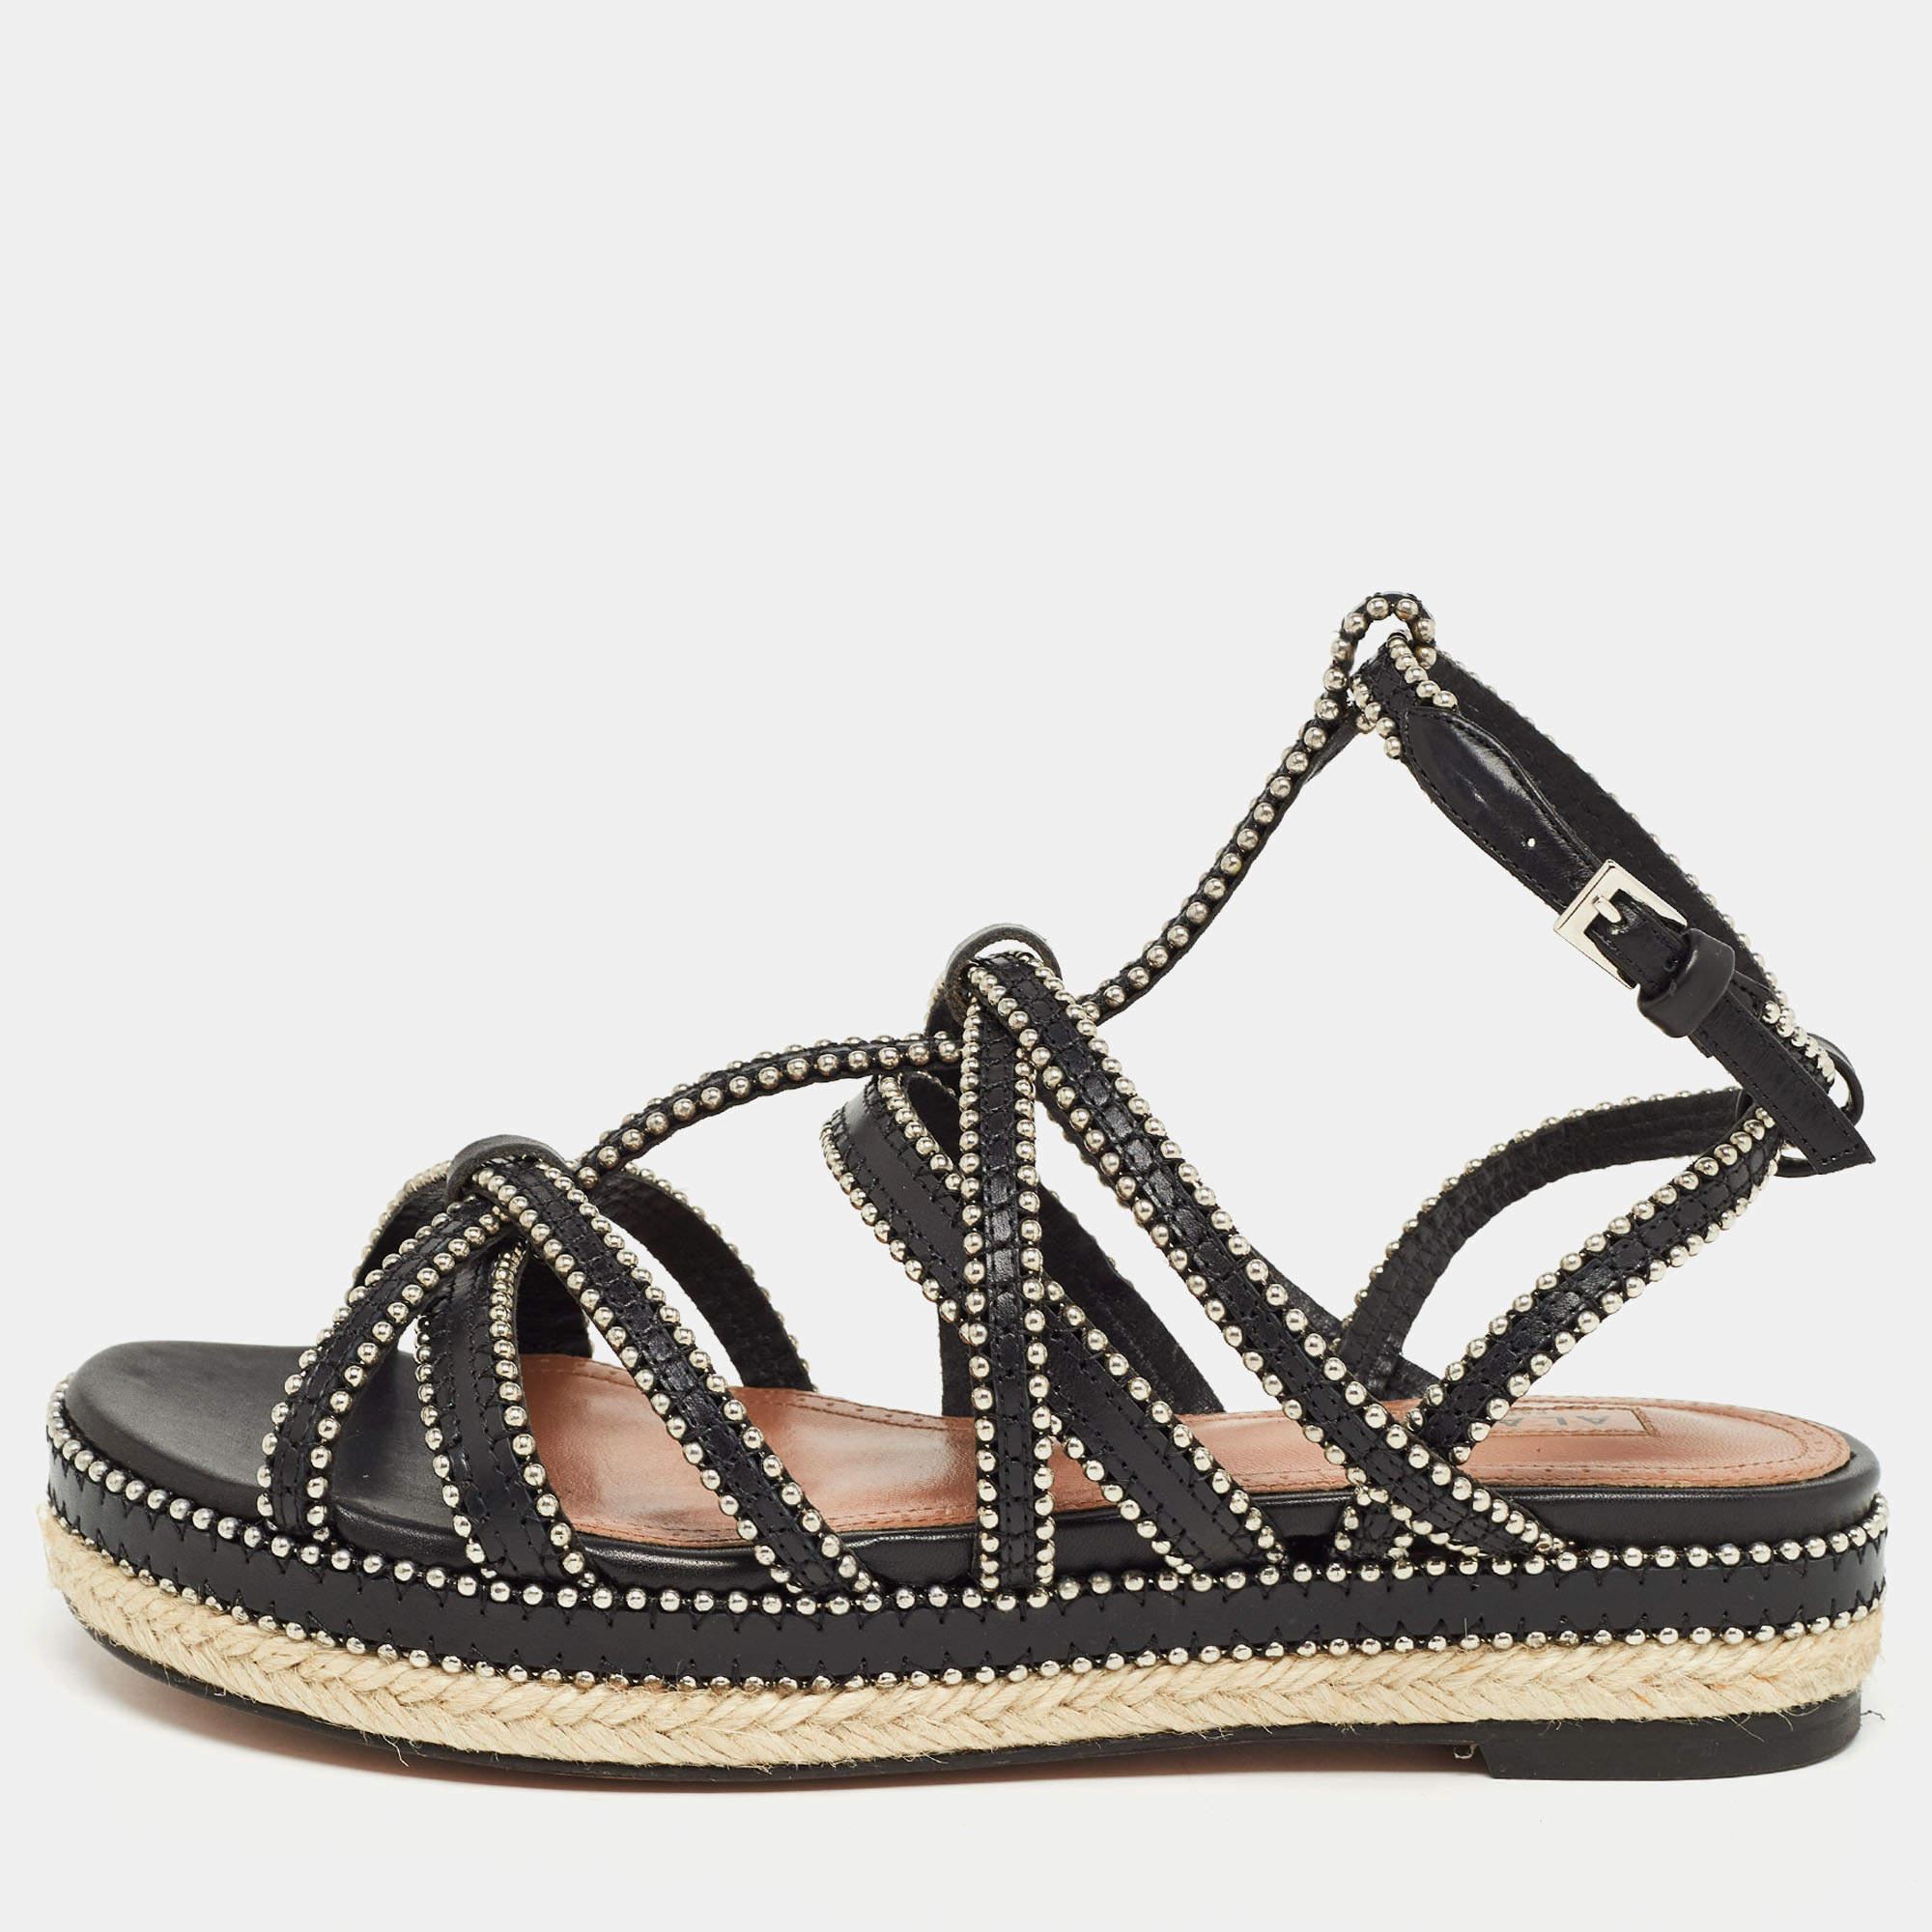 Alaia Black Leather Studded Strappy Espadrille Flat Sandals Size 37 For Sale 4